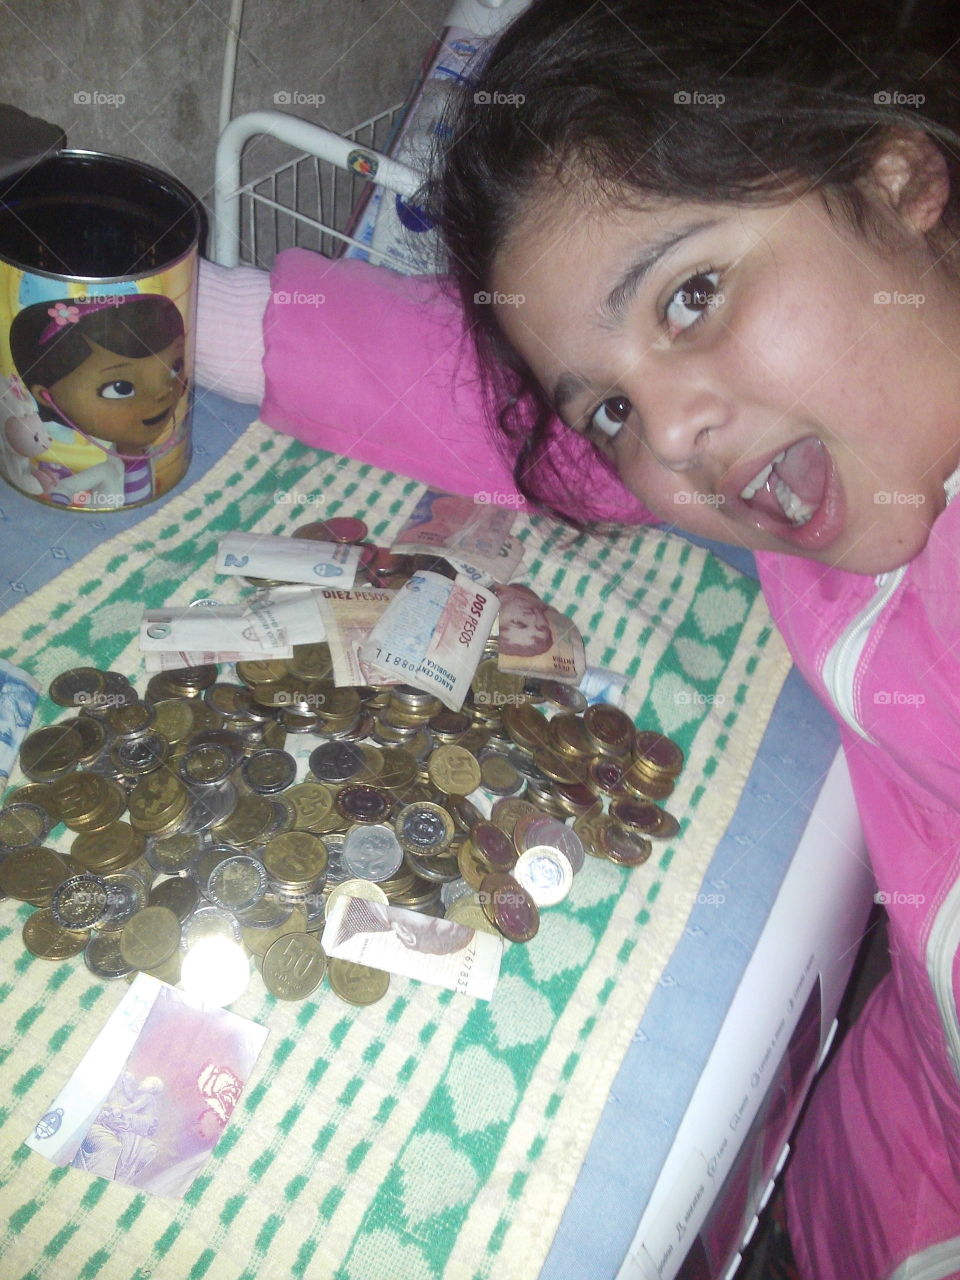 The Savings Of a Girl. After 6 months, my daughter decided to break your moneybox